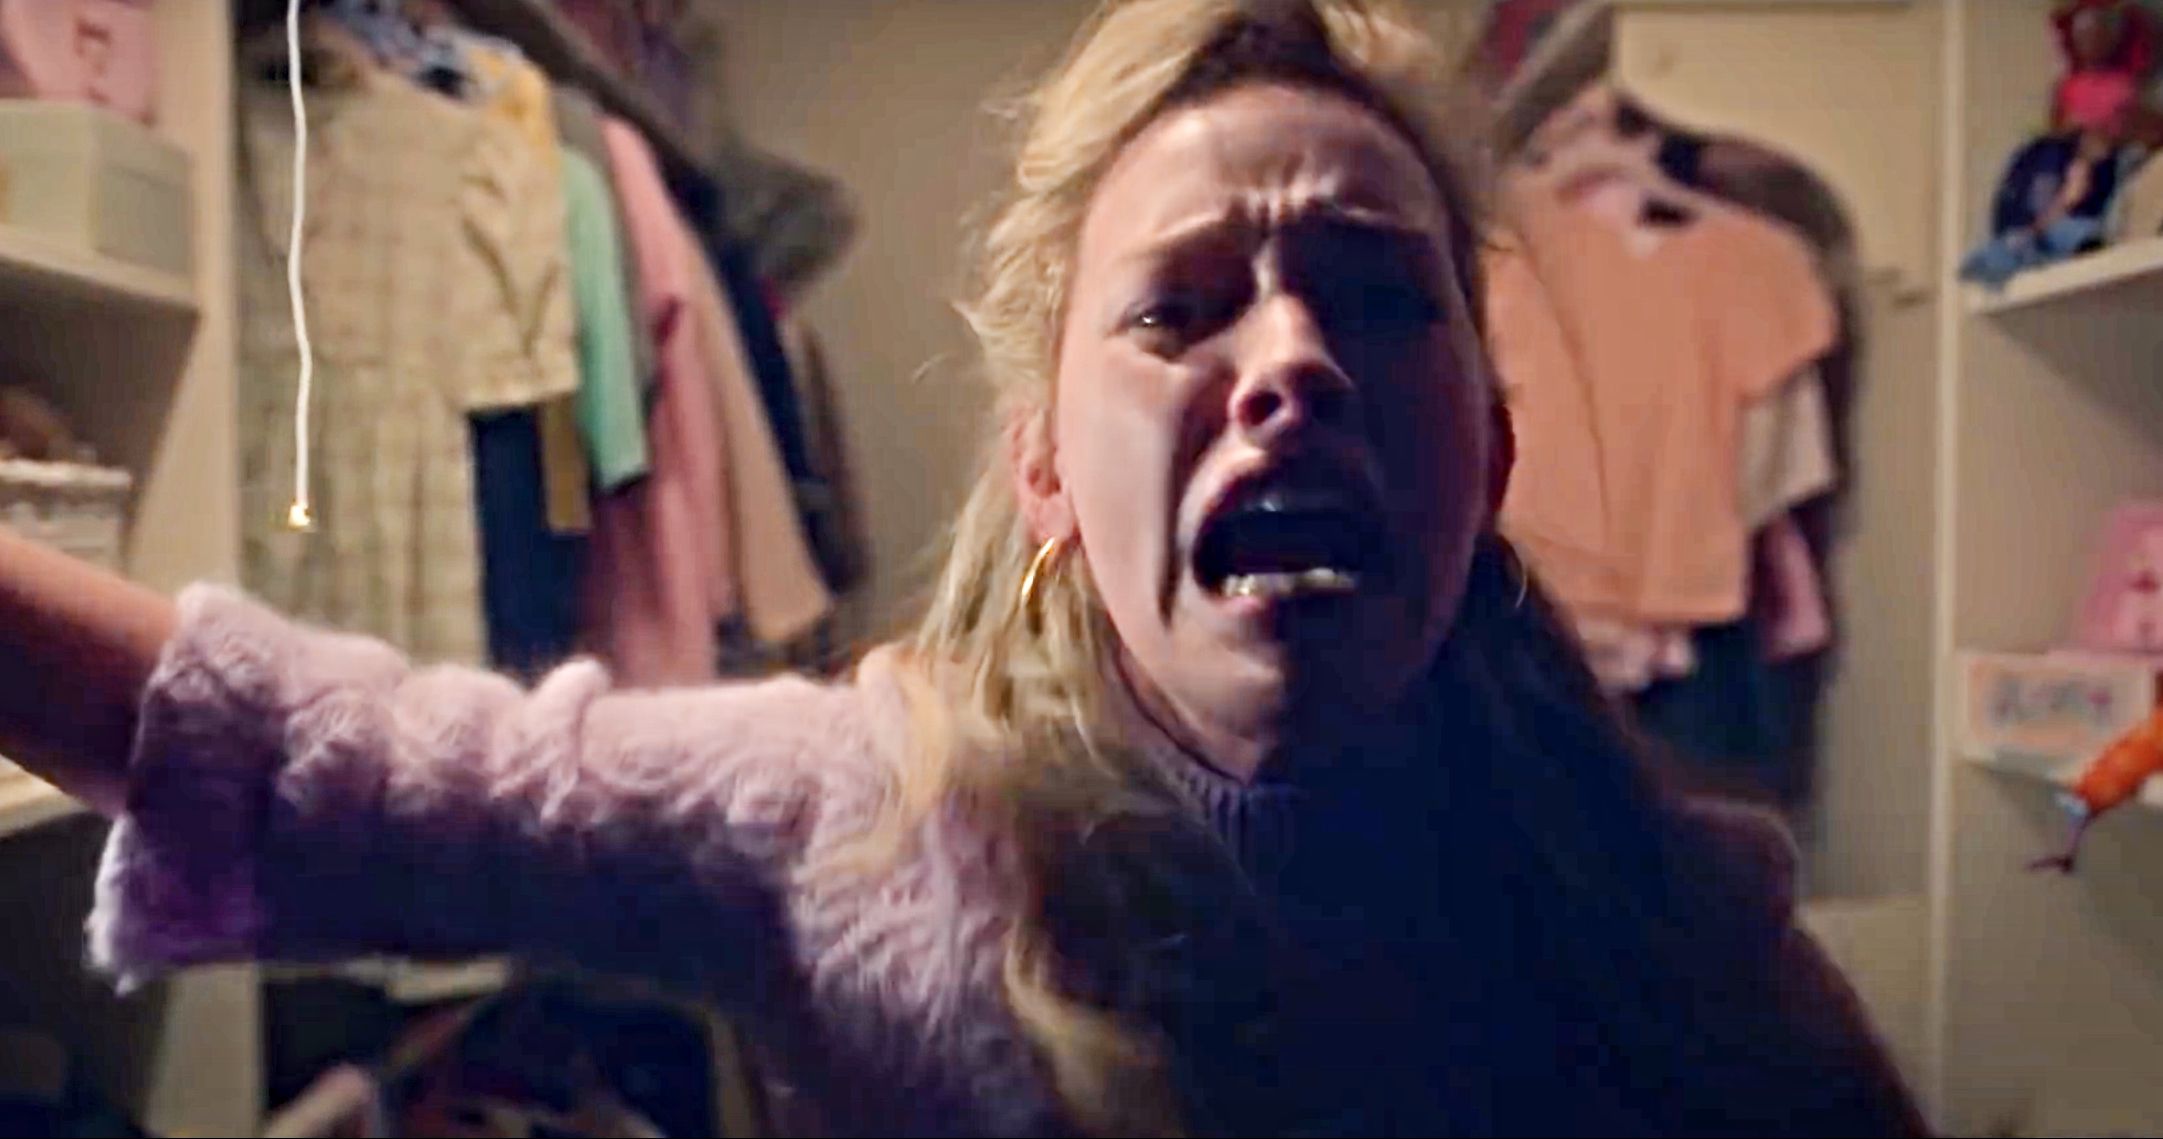 The Haunting of Bly Manor Trailer #2 Brings Big Scares to Netflix This Halloween